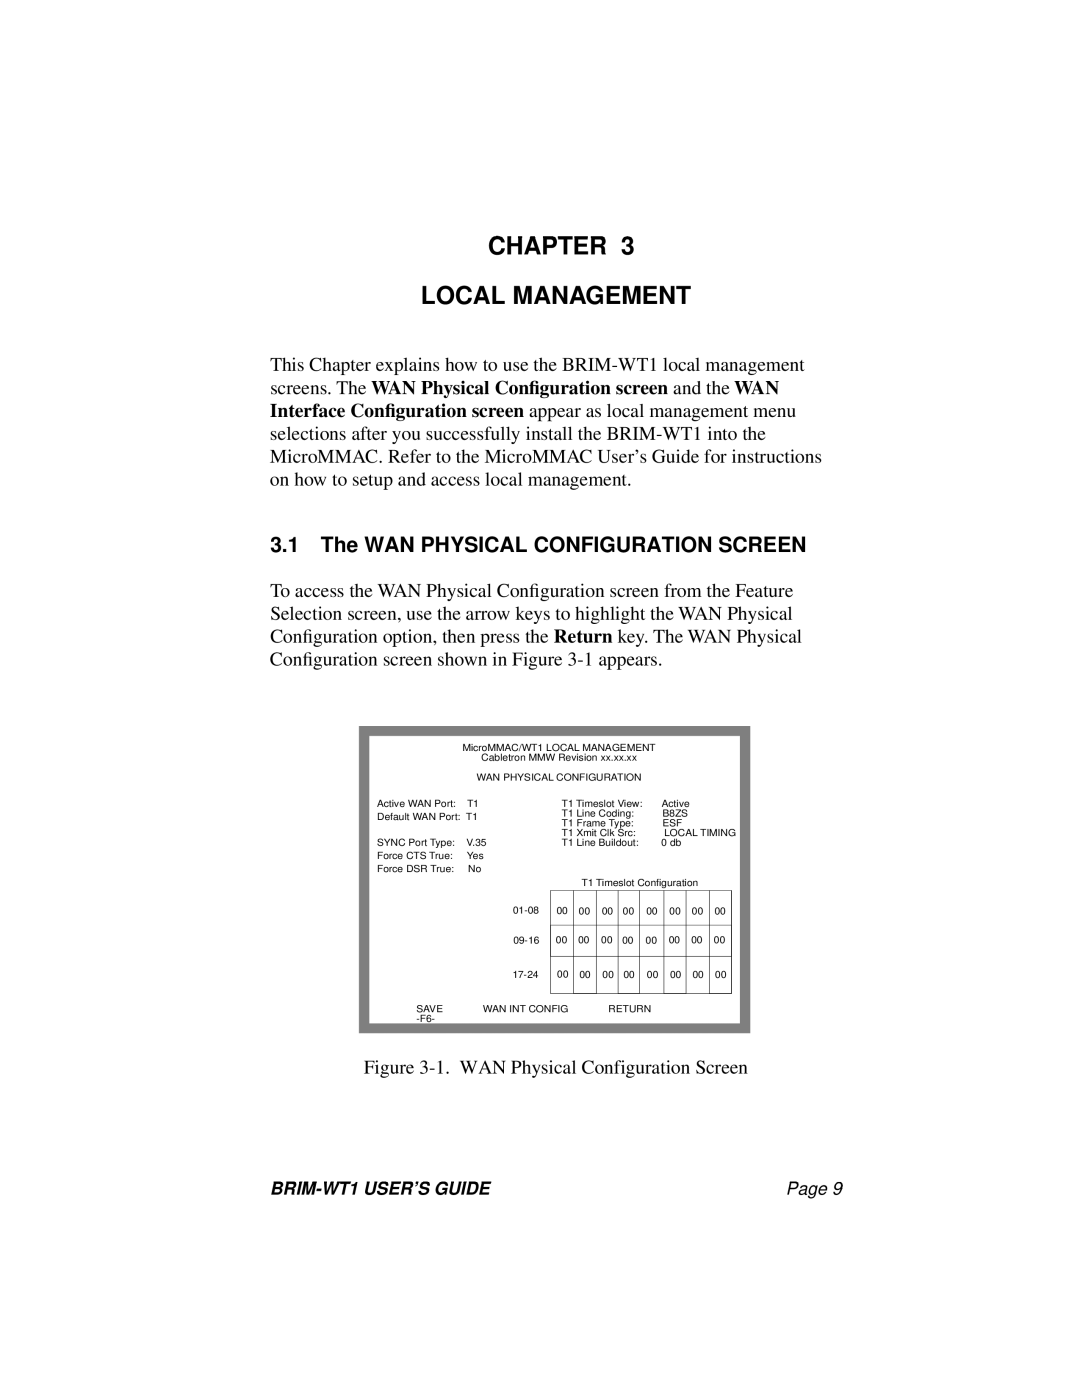 Cabletron Systems BRIM-WT1 manual Chapter Local Management, The WAN PHYSICAL CONFIGURATION SCREEN 